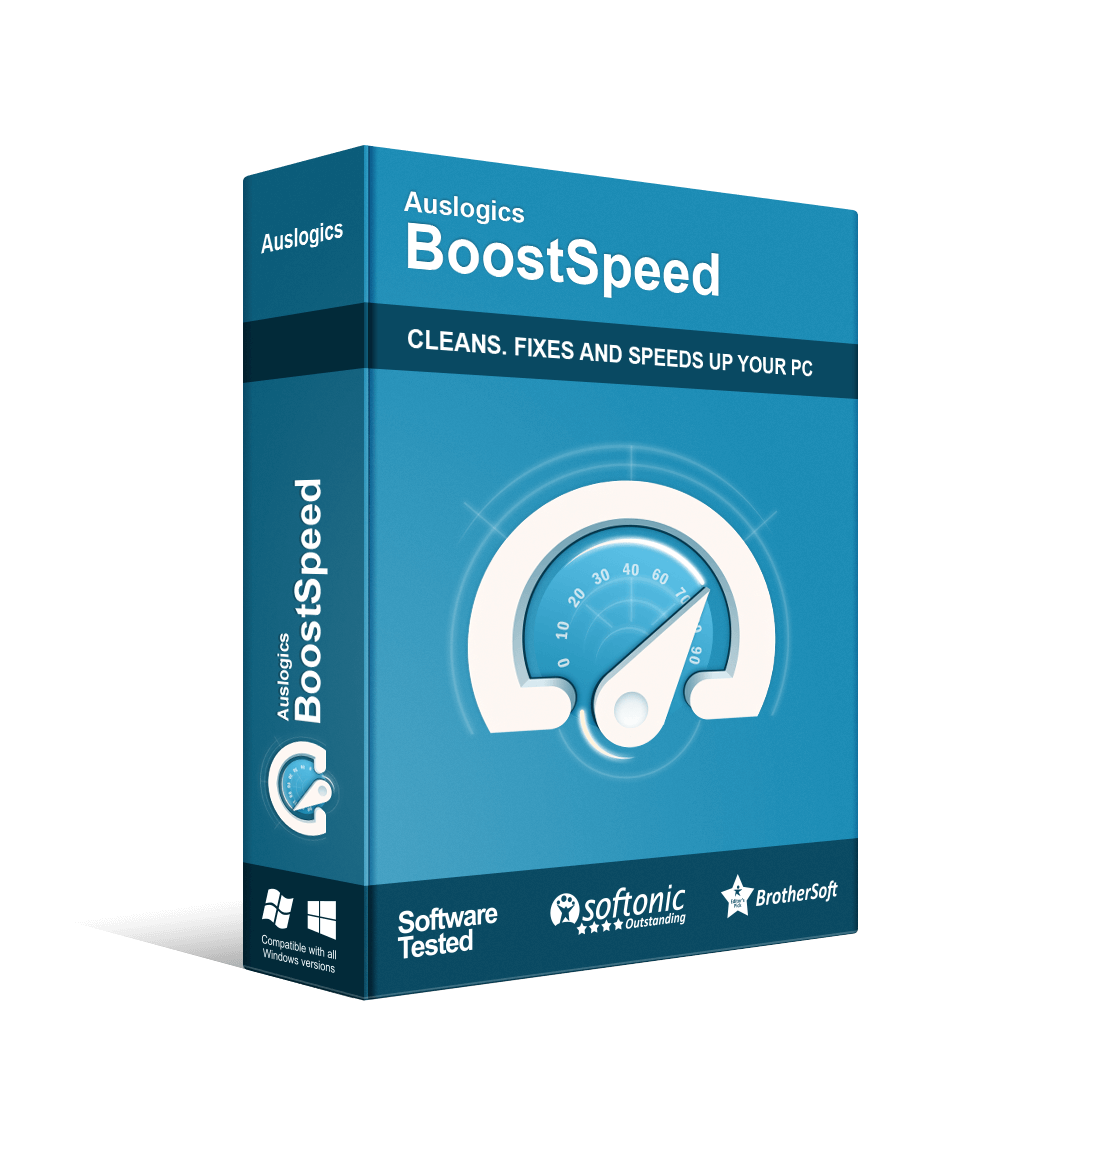 boost-speed-boxshot-1-png